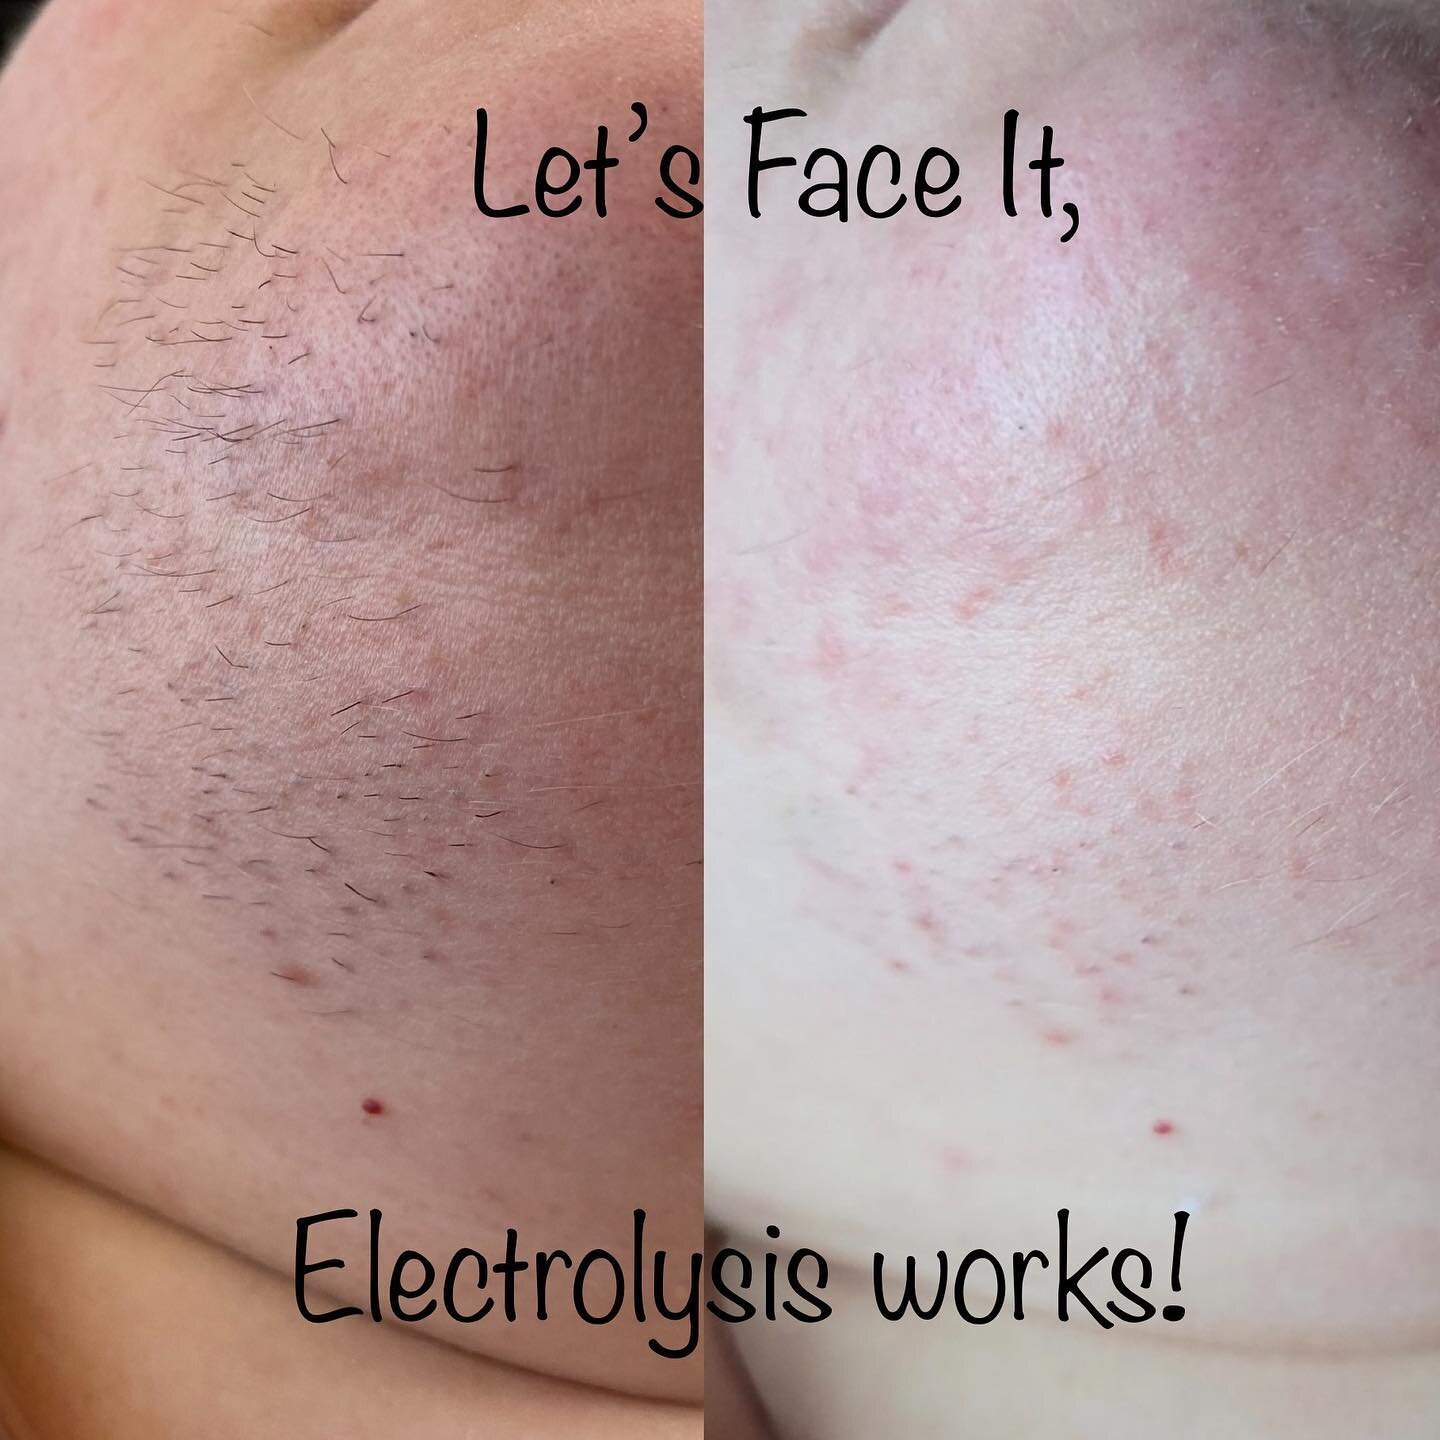 @belleville.electrolysis.laser we offer permanent hair removal by Electrolysis! This stuff works, simply put! Essentially we cauterize the blood supply to the root of the hair and the hair simply can not come back! Every hair needs to be treated 6-8 